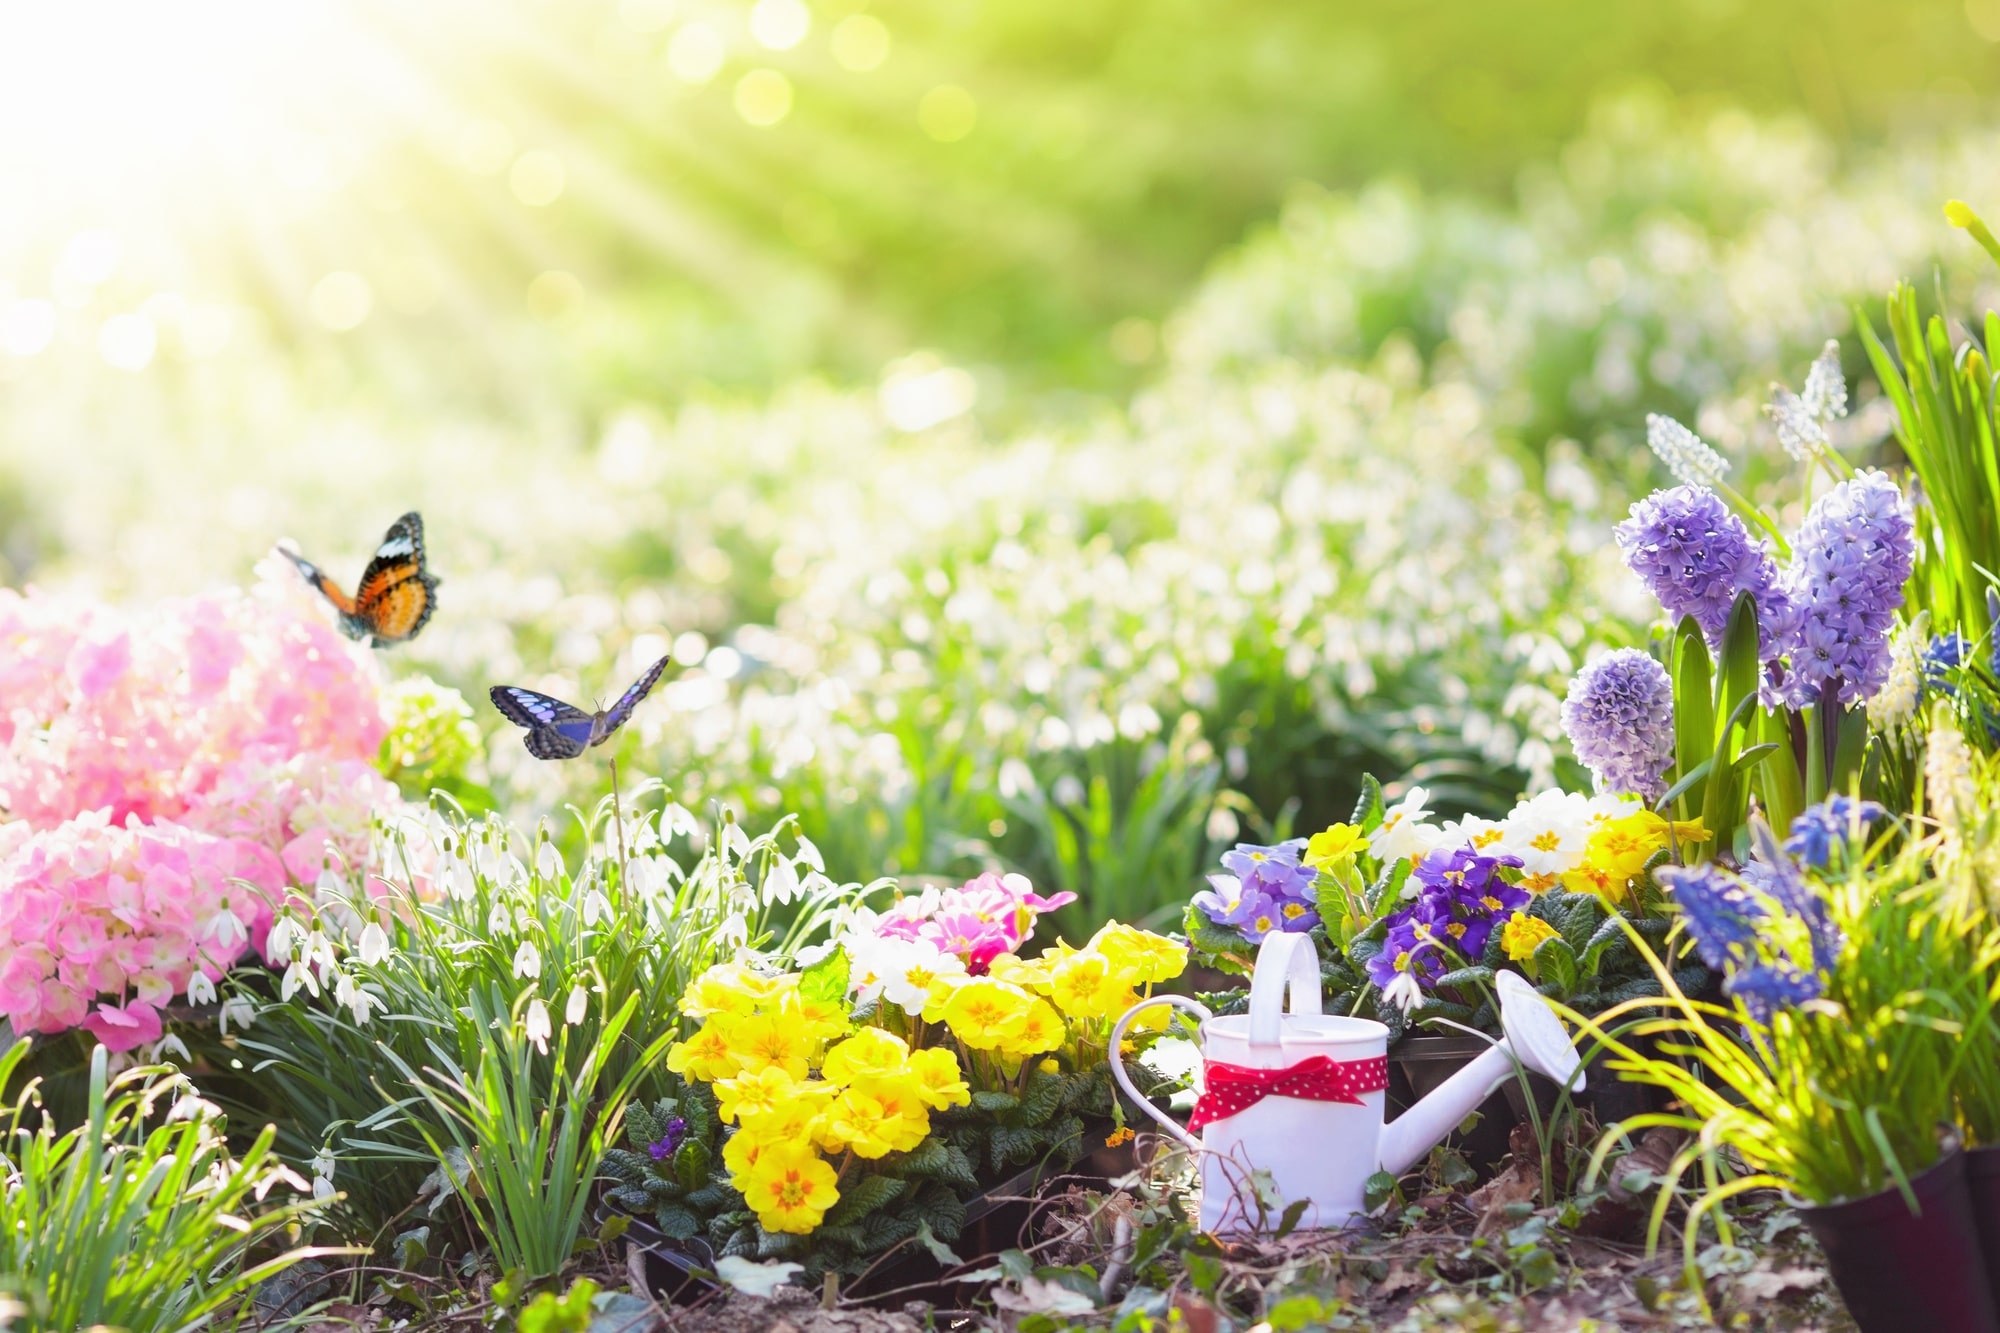 How Can You Get a Rental Property Ready for Spring?